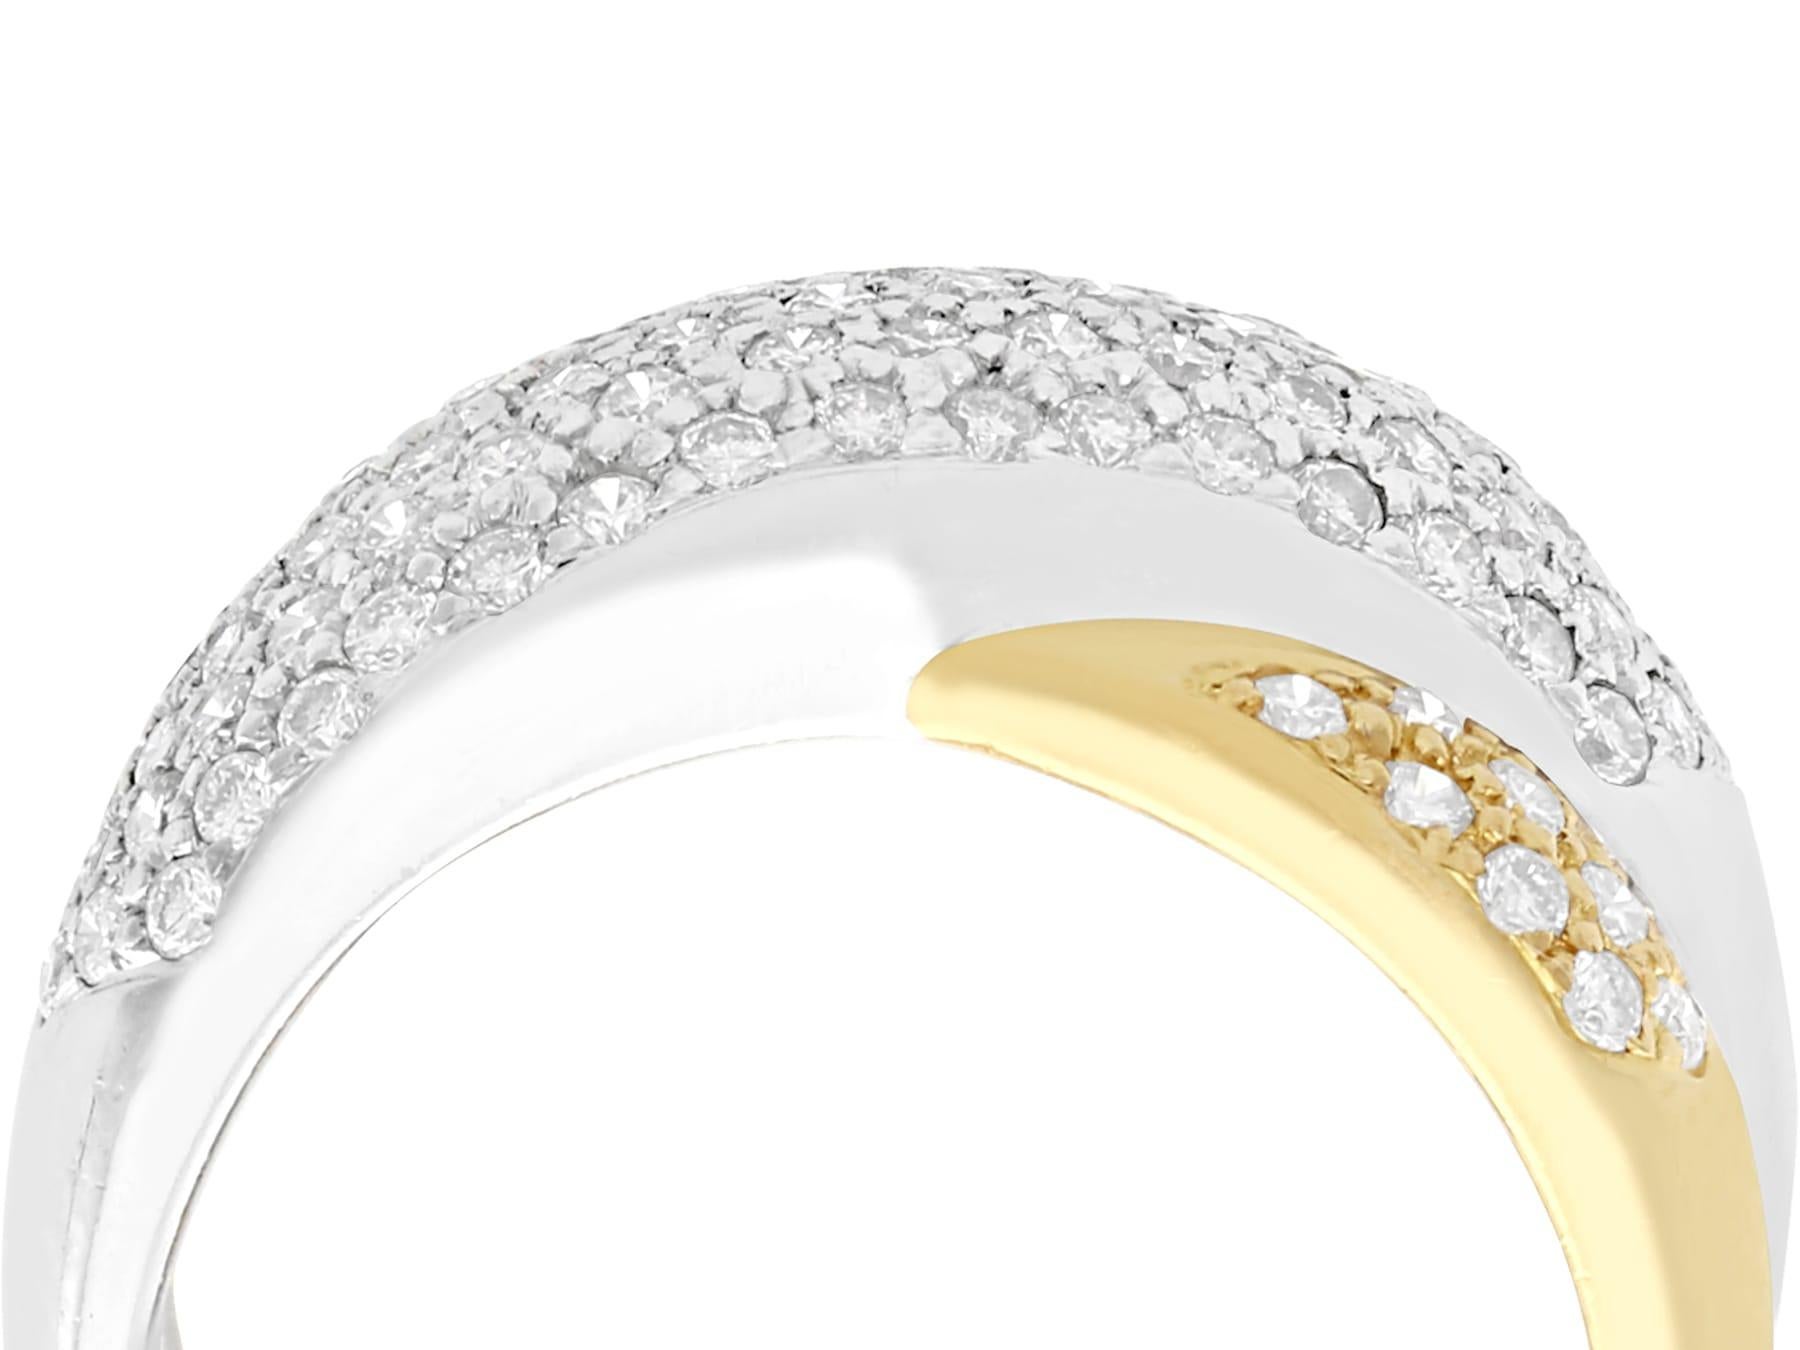  An impressive 0.52 carat diamond, 18 karat yellow gold and 18 karat white gold cocktail ring; part of our diverse diamond jewelry collections.

This fine and impressive diamond ring has been crafted in 18k yellow and white gold.

The ring has a